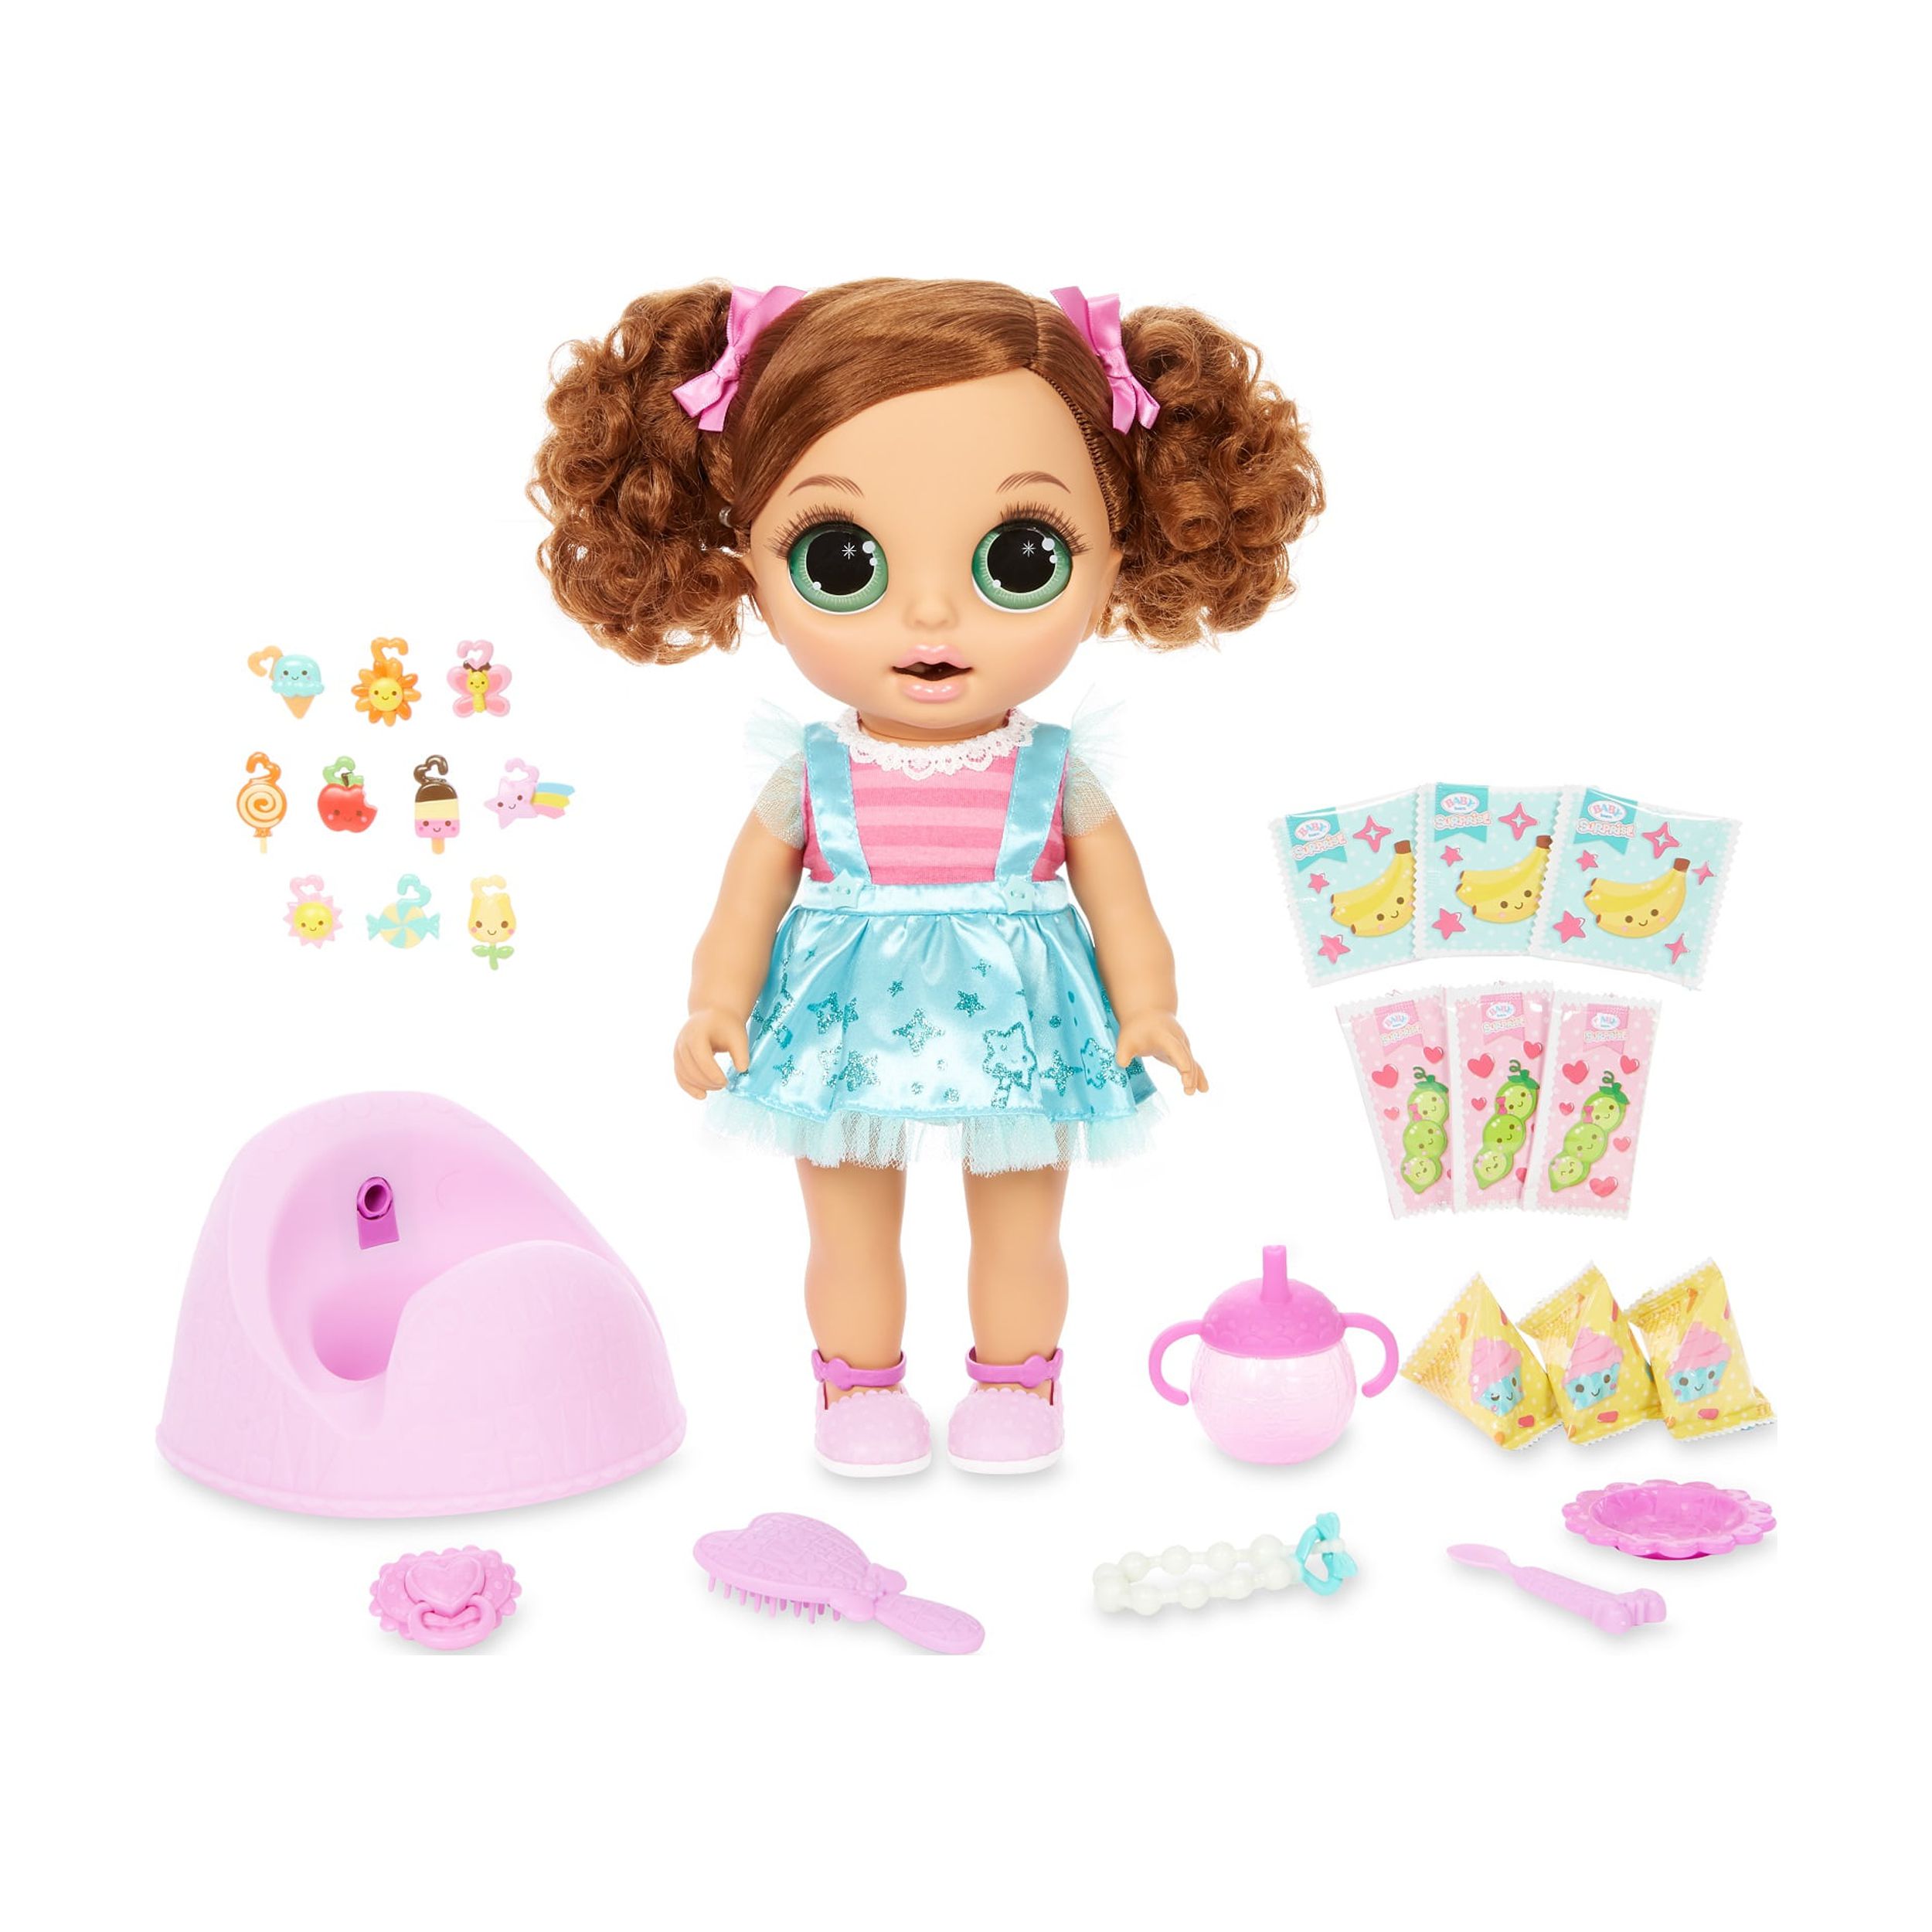 Baby Born Surprise Magic Potty Surprise Green Eyes - Doll Pees Glitter & Poops Surprise Charms, Toys for Girls Ages 3 4 5+ - image 1 of 7